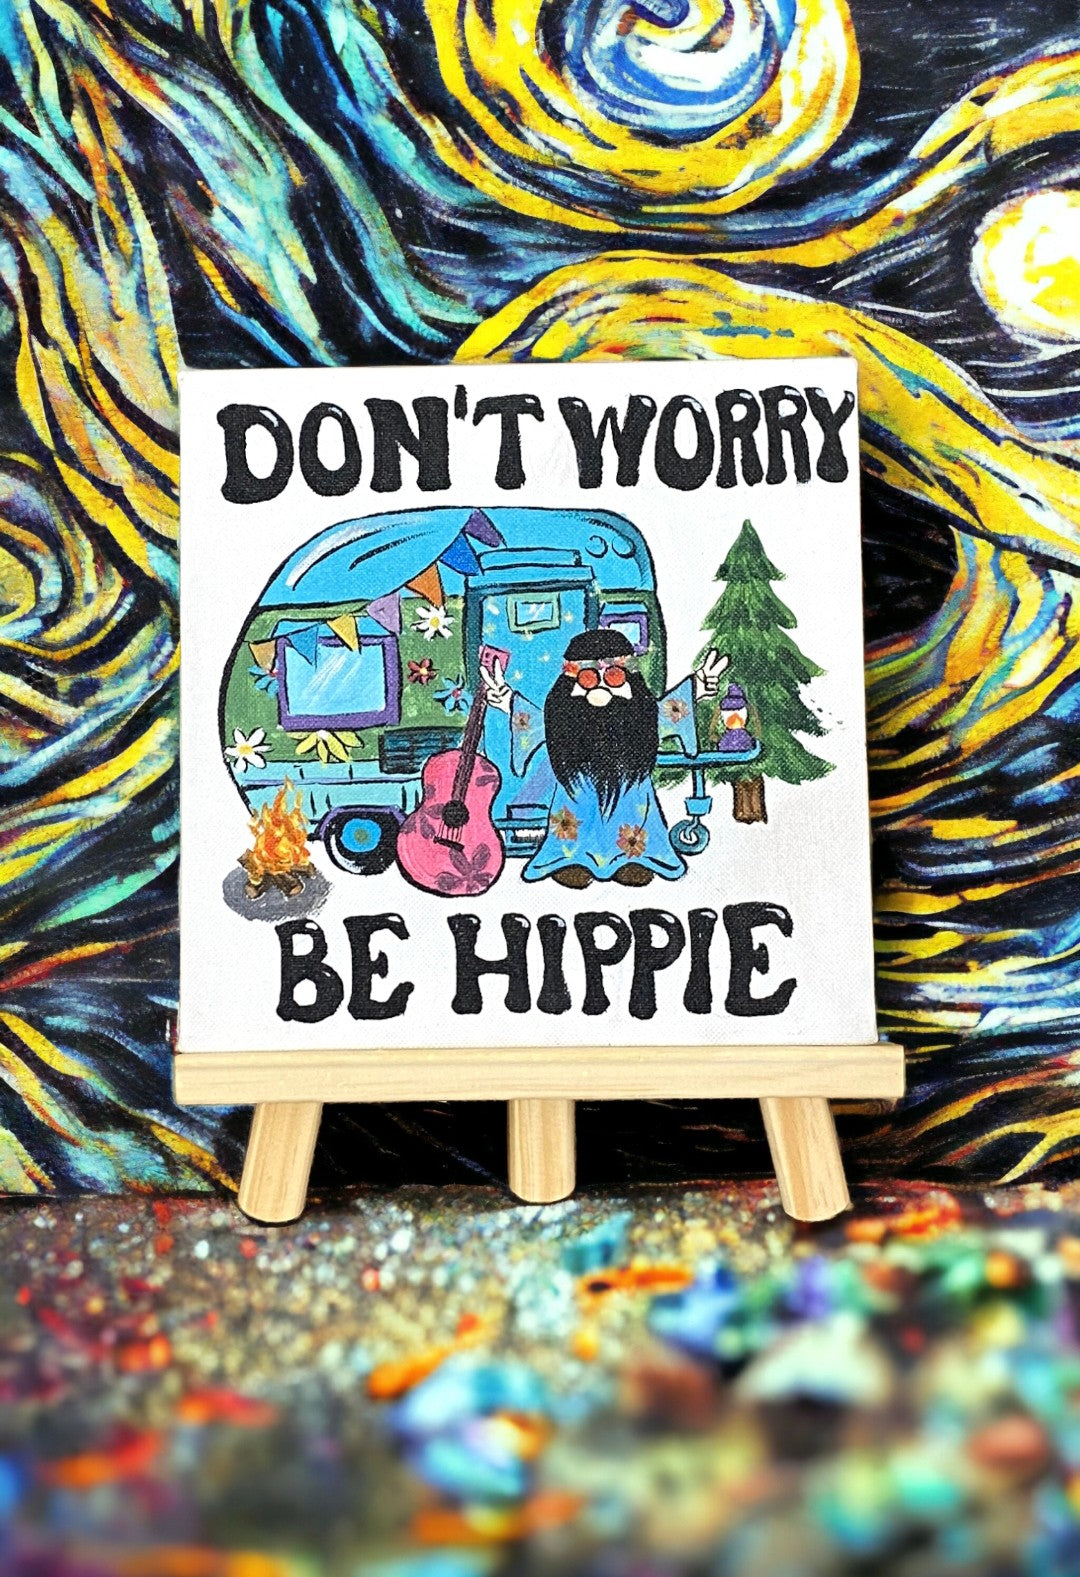 Emerald Blossoms - A hand painted canvas &quot;Don’t Worry, Be Hippie&quot;